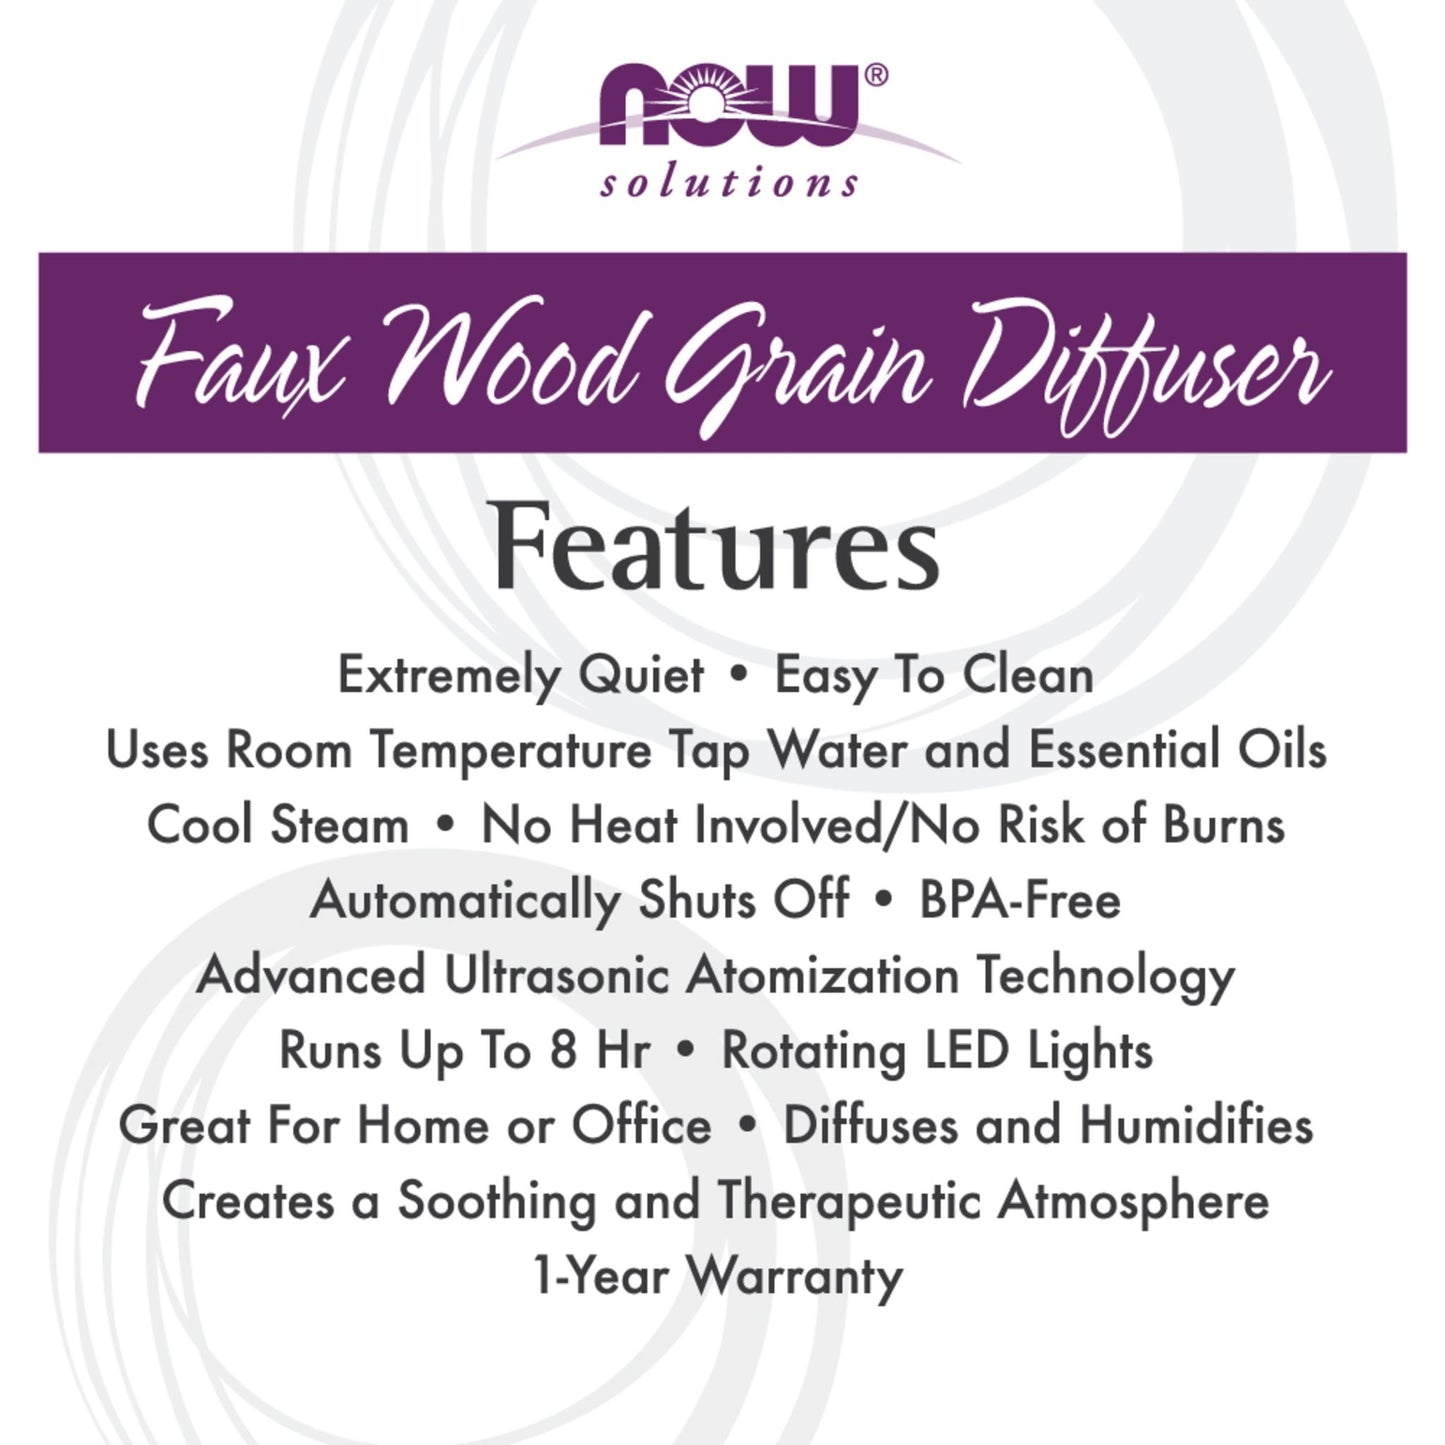 NOW Foods Faux Wood Diffuser